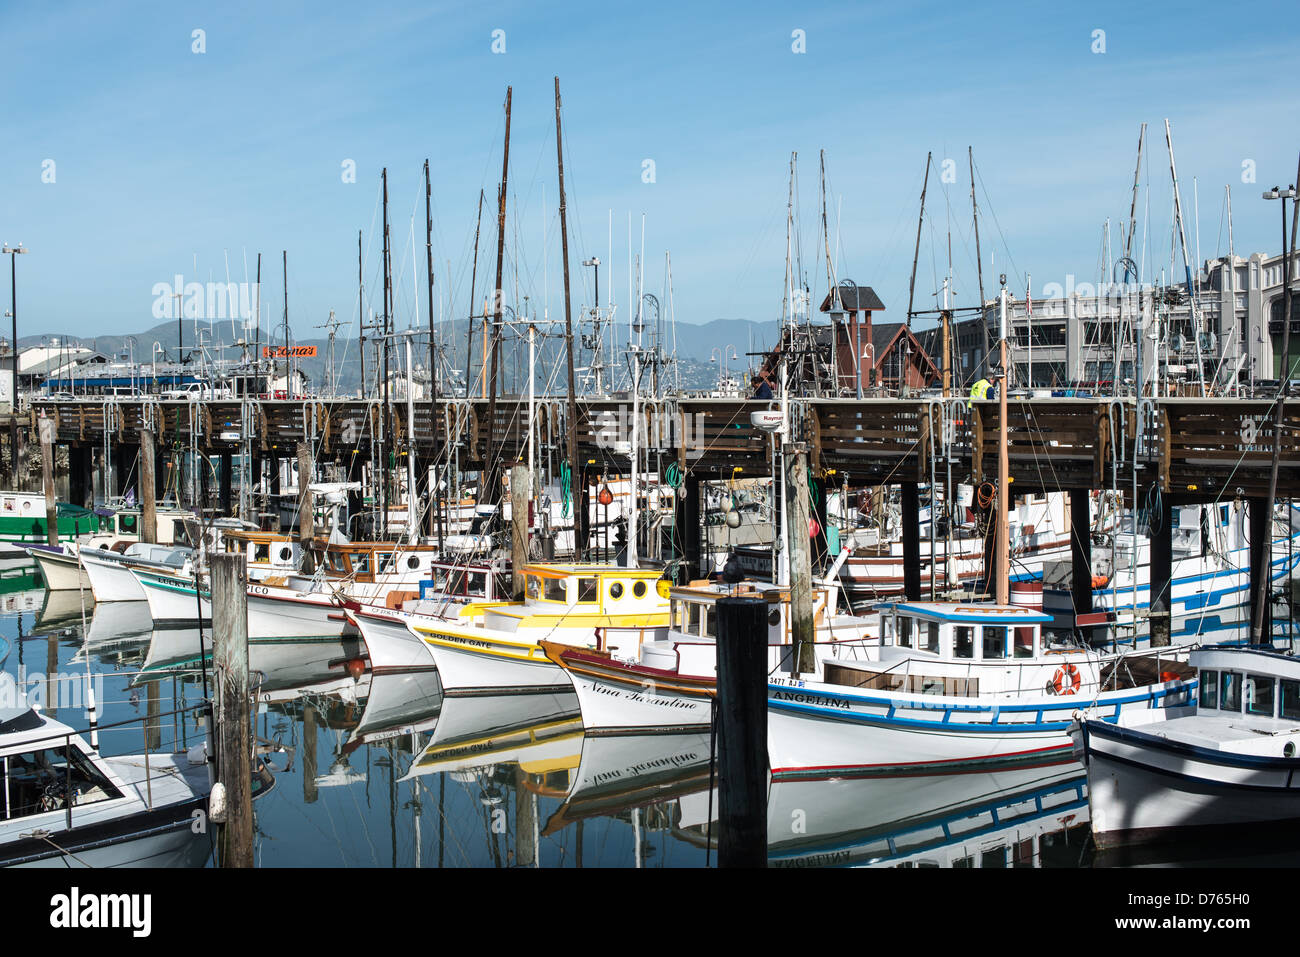 SAN FRANCISCO, California - Wooden fishing boats at their moorings in Fisherman's Grotto, next to Fisherman's Wharf, in San Francisco, California. Stock Photo